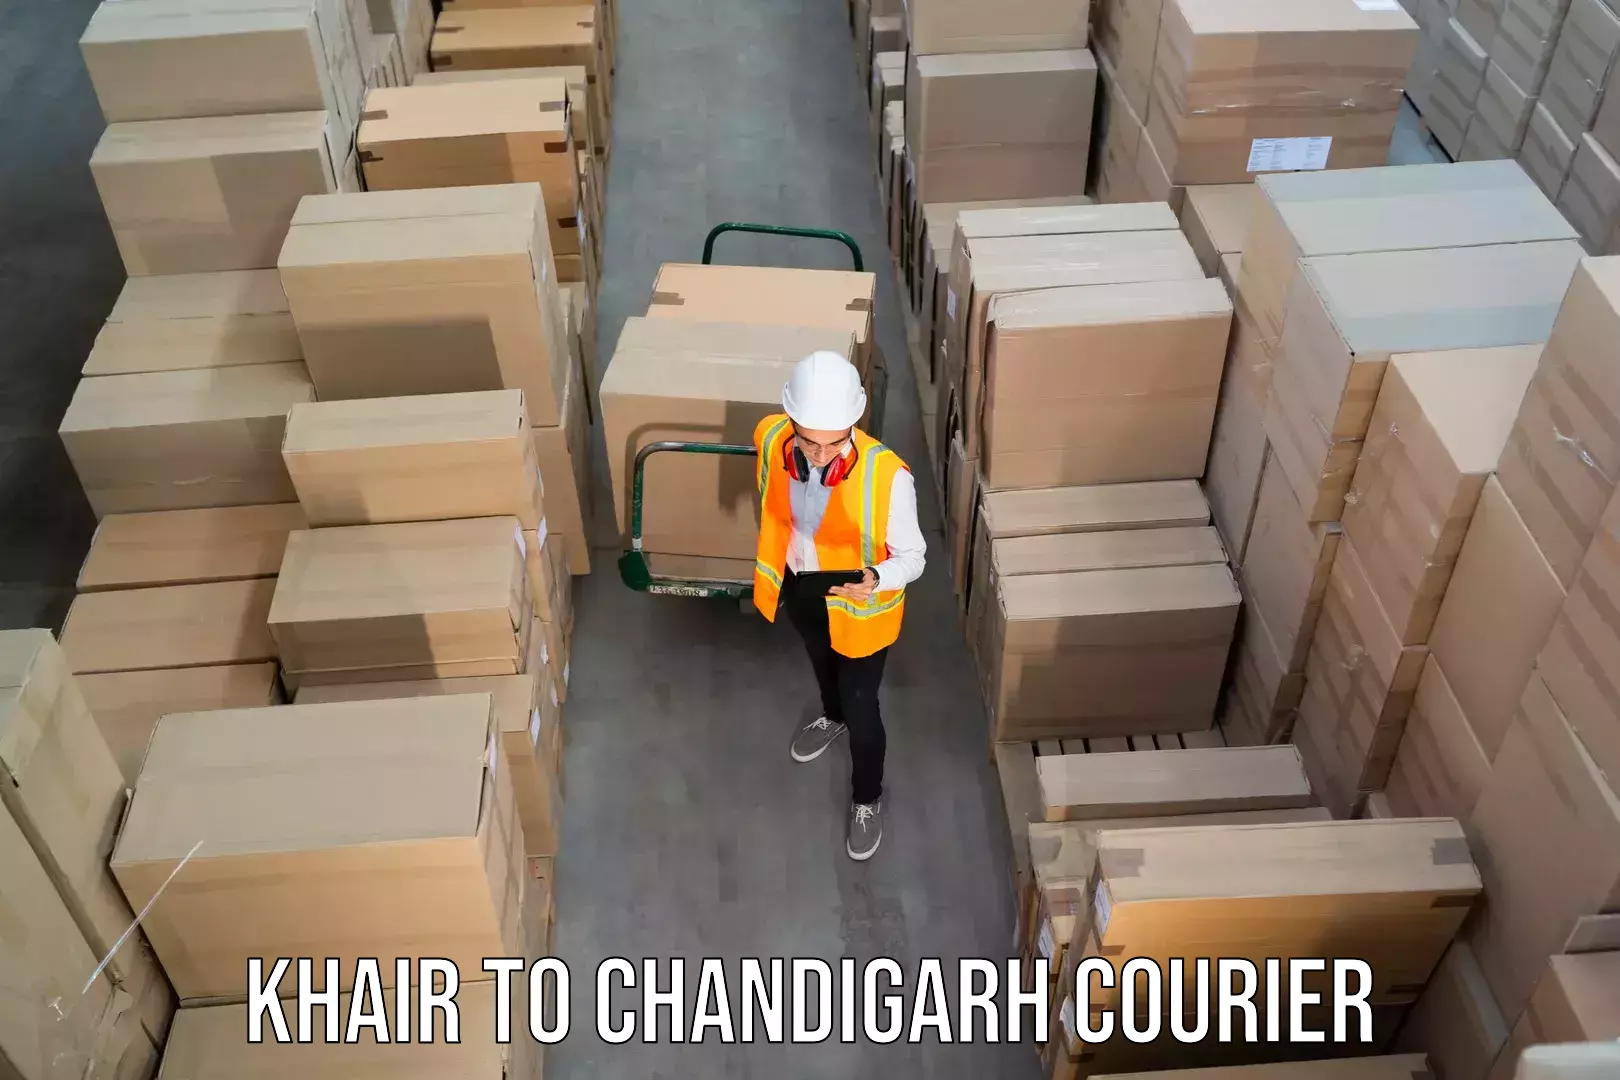 Budget-friendly shipping Khair to Chandigarh